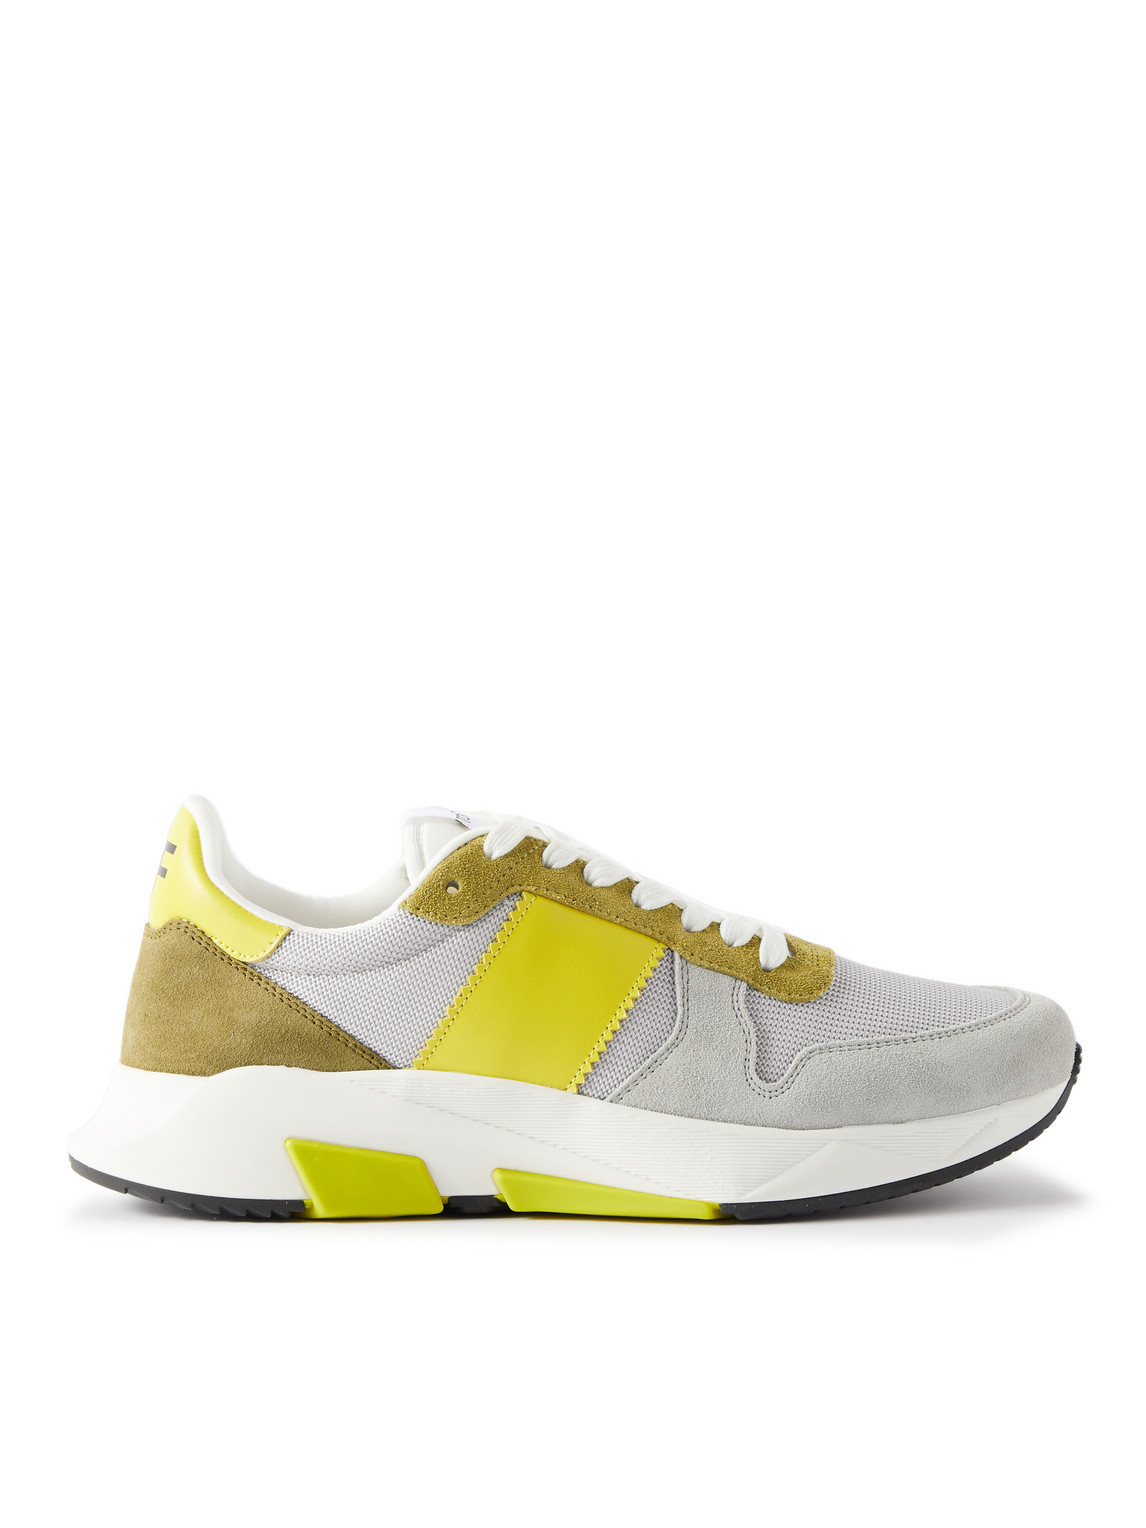 TOM FORD JAGGA LEATHER-TRIMMED SUEDE AND MESH SNEAKERS